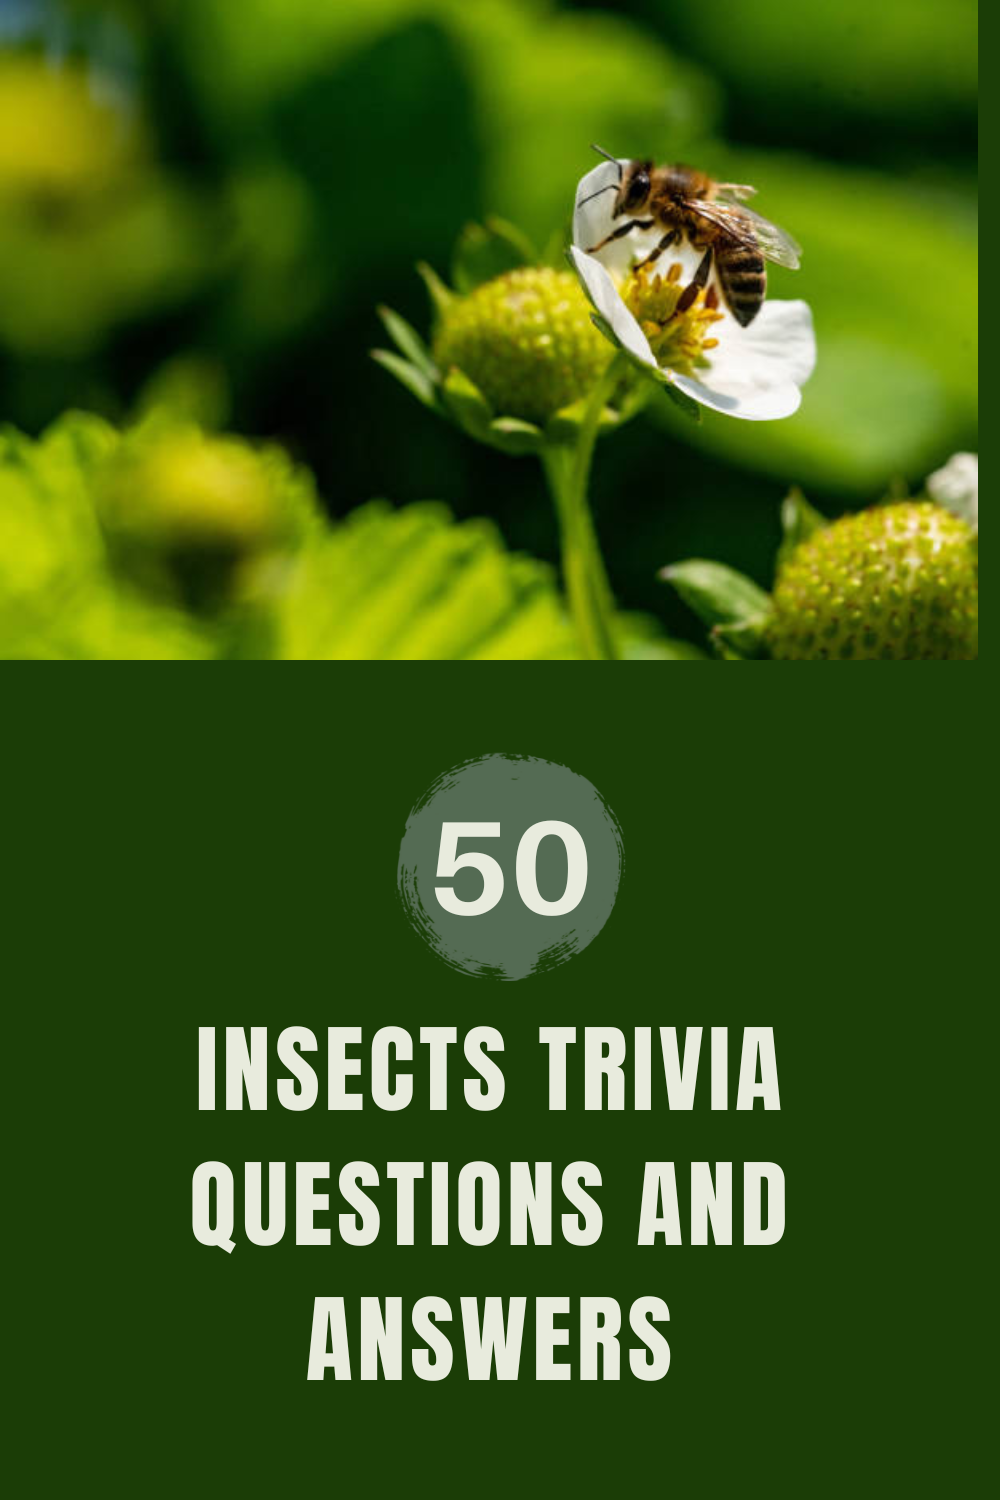 50 Insects Trivia Questions and Answers